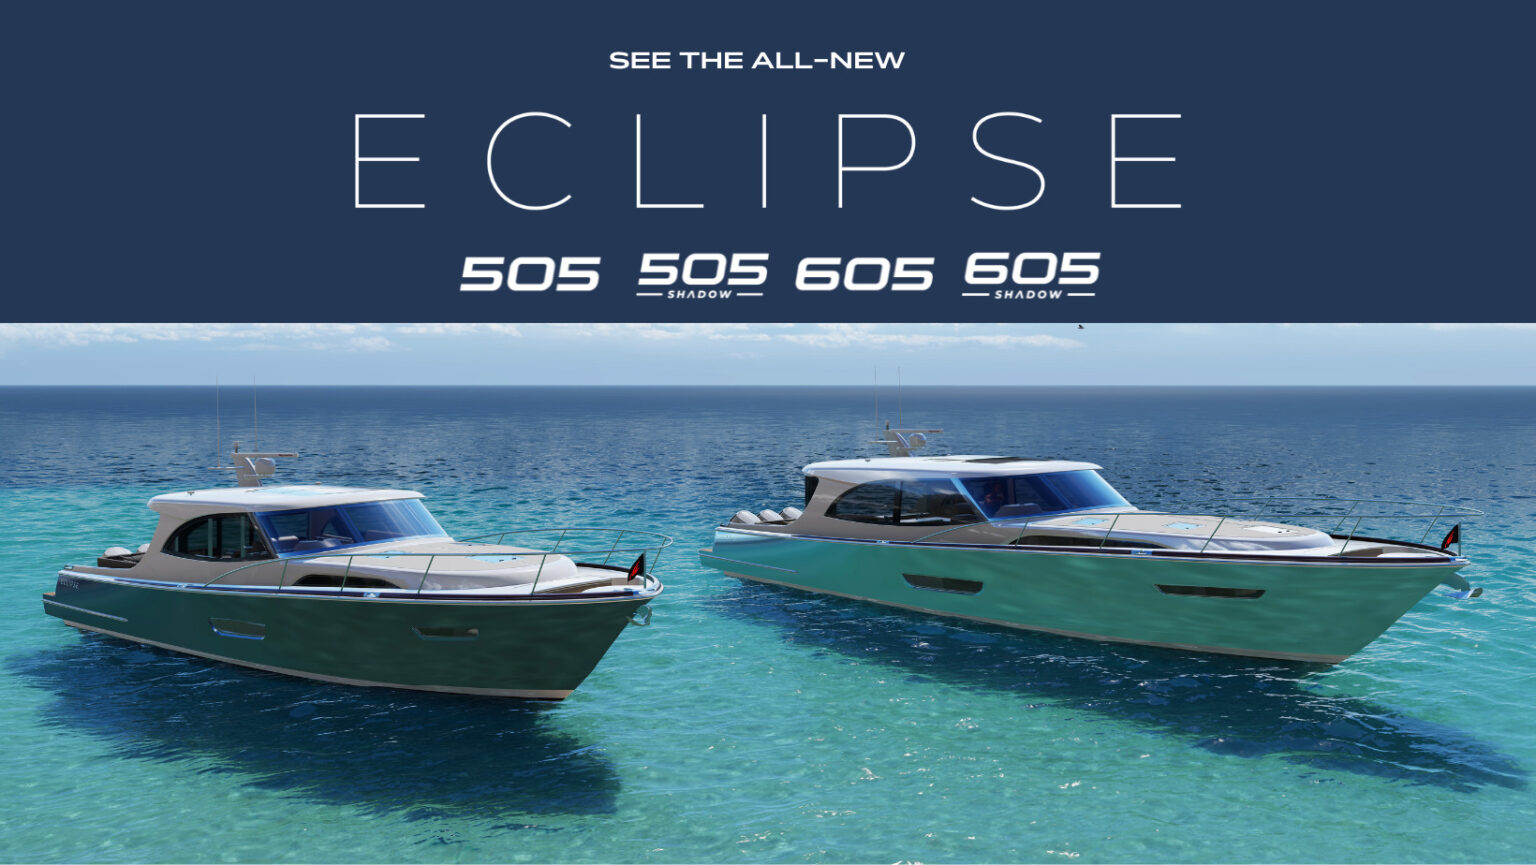 Two Oceans Marine Manufacturing, HMY Yacht Sales Launch Eclipse Model Line